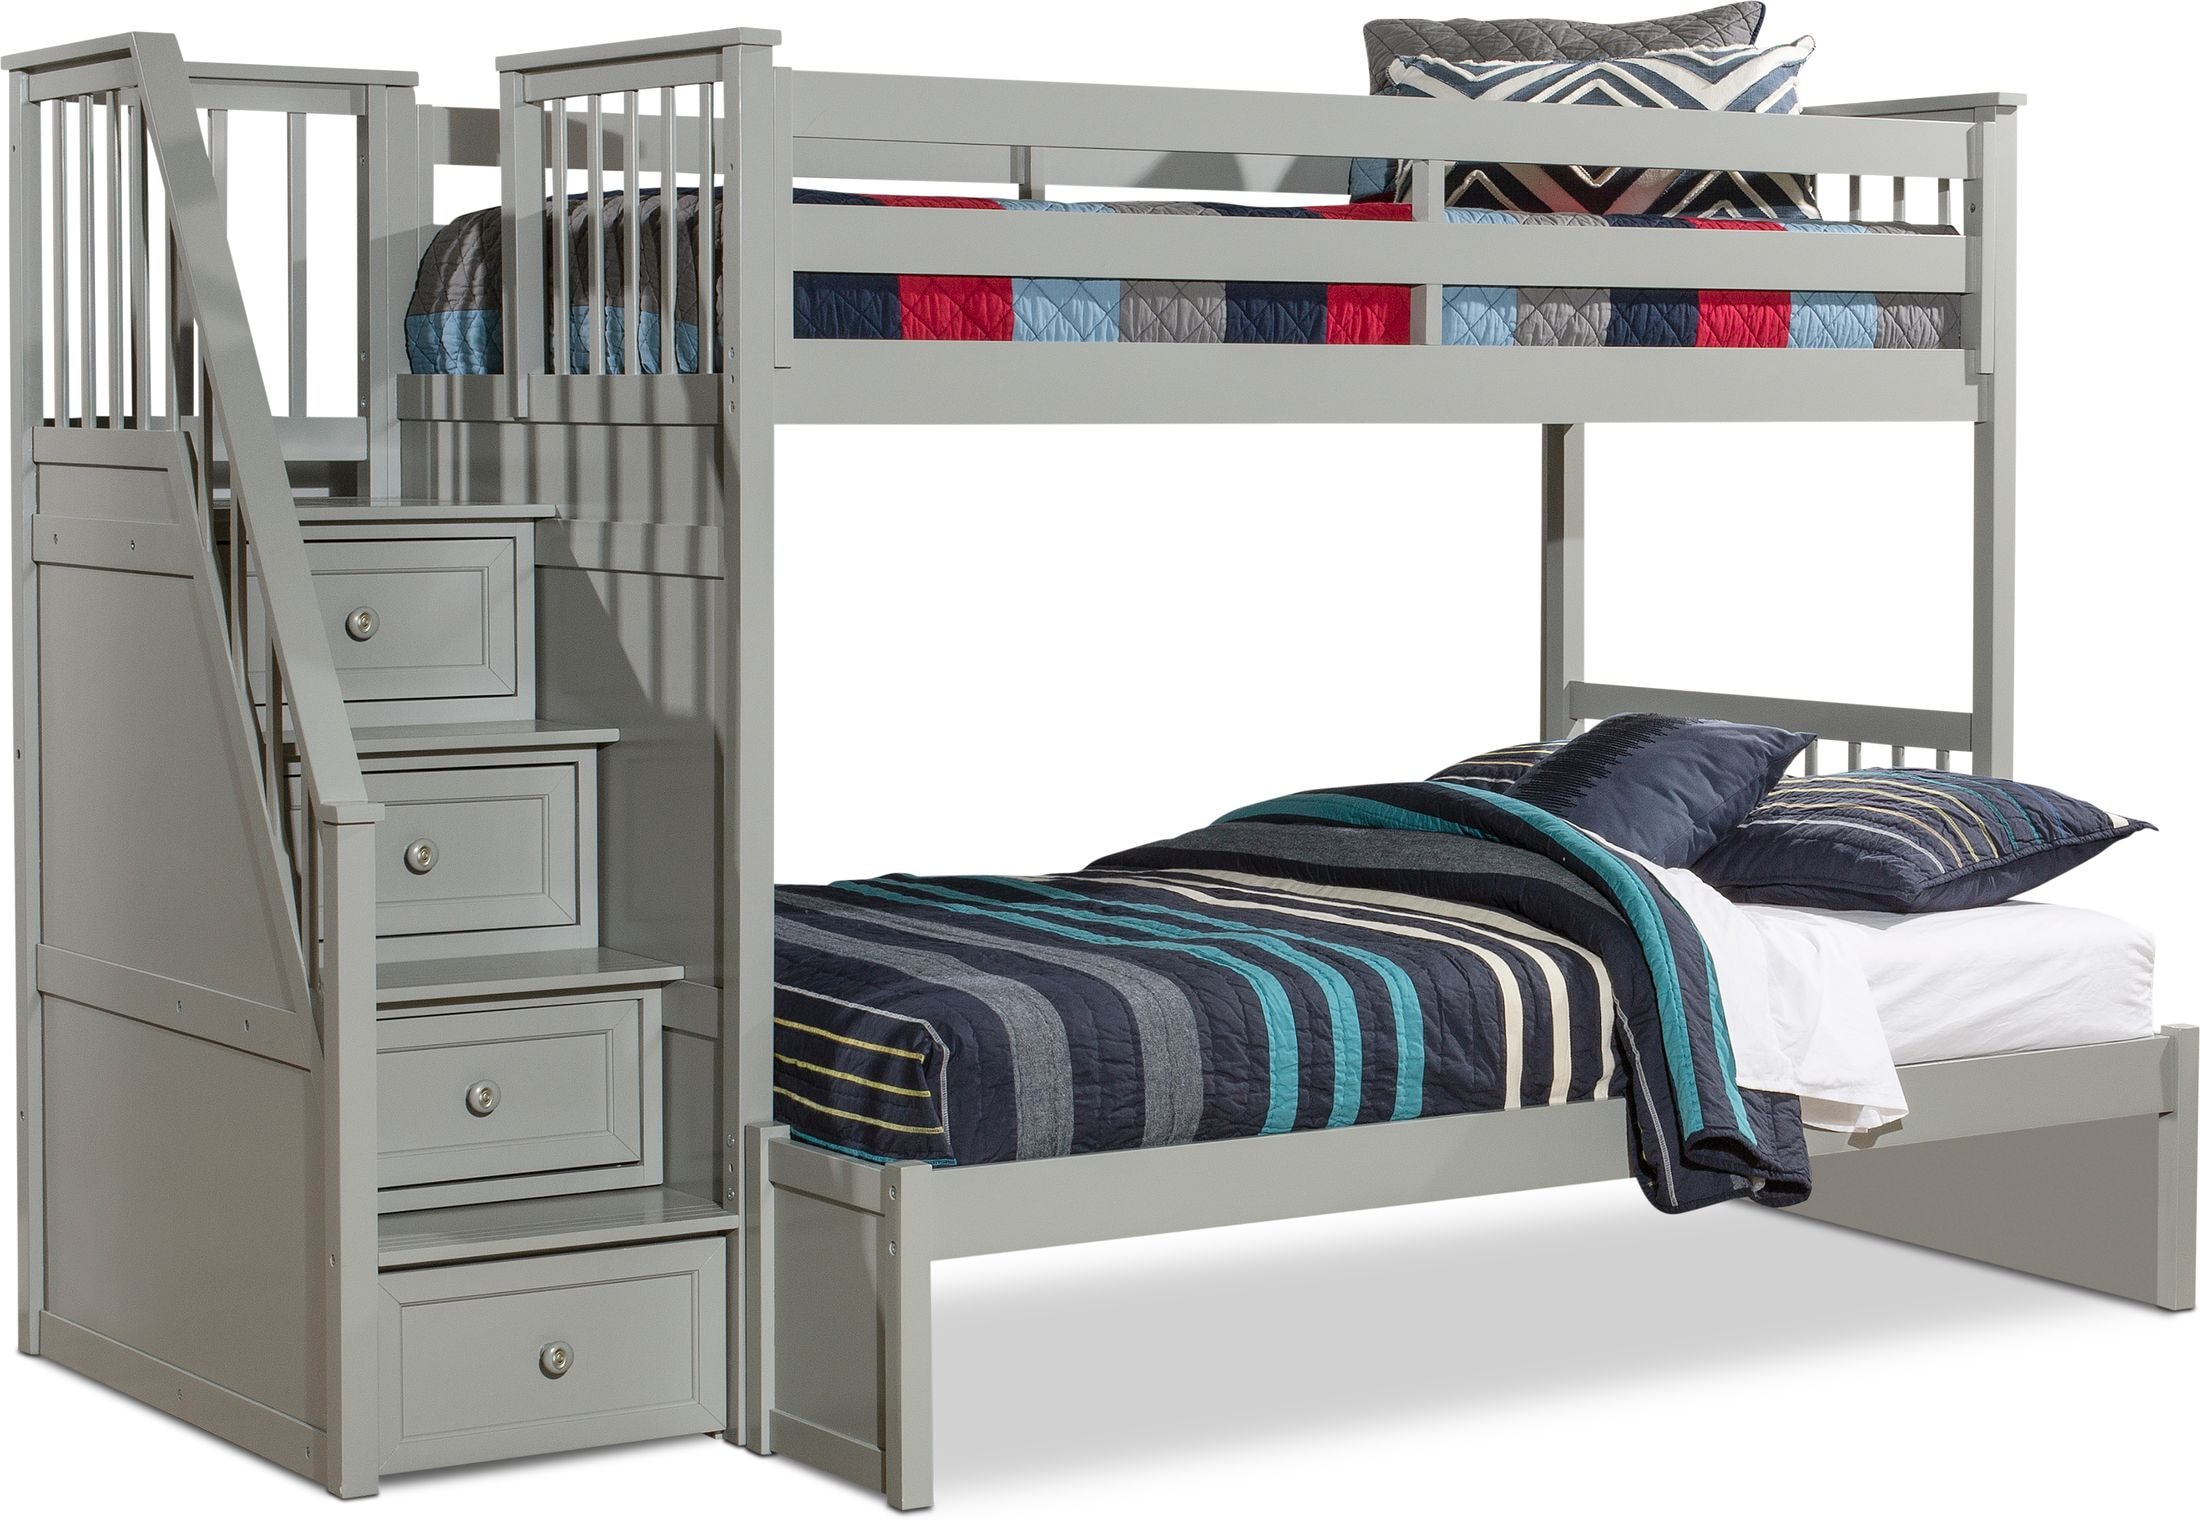 Undefined Value City Furniture, Gray Twin Bed